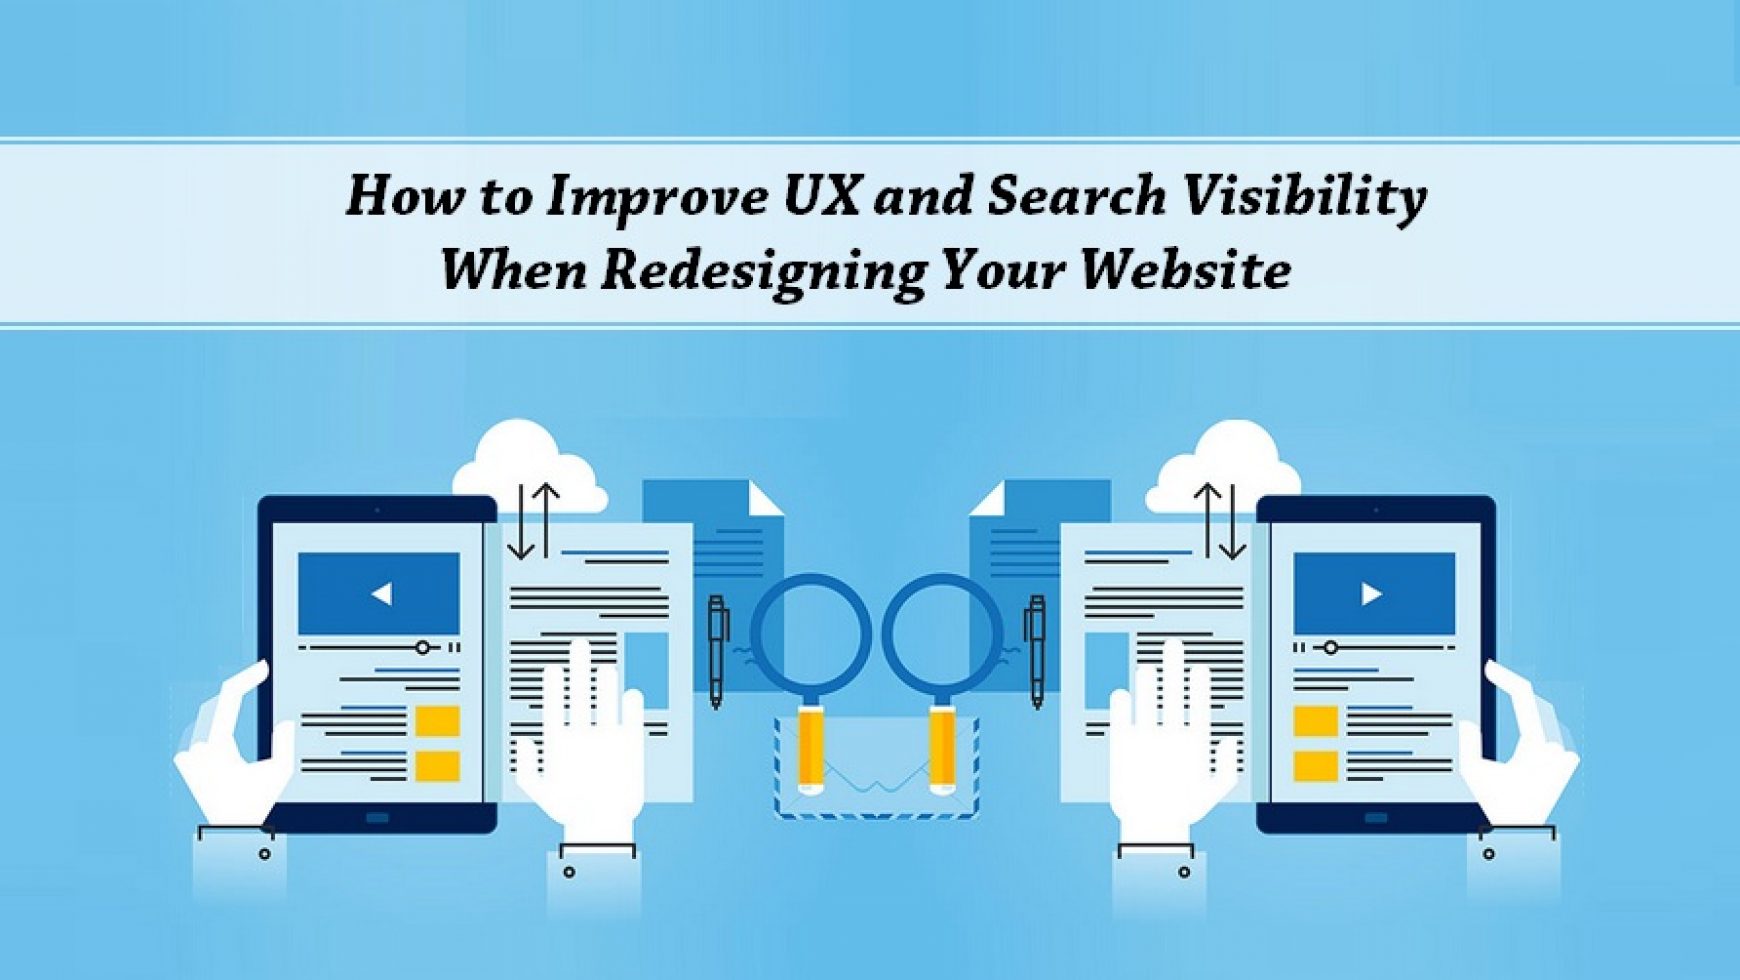 How to Improve UX and Search Visibility When Redesigning Your Website